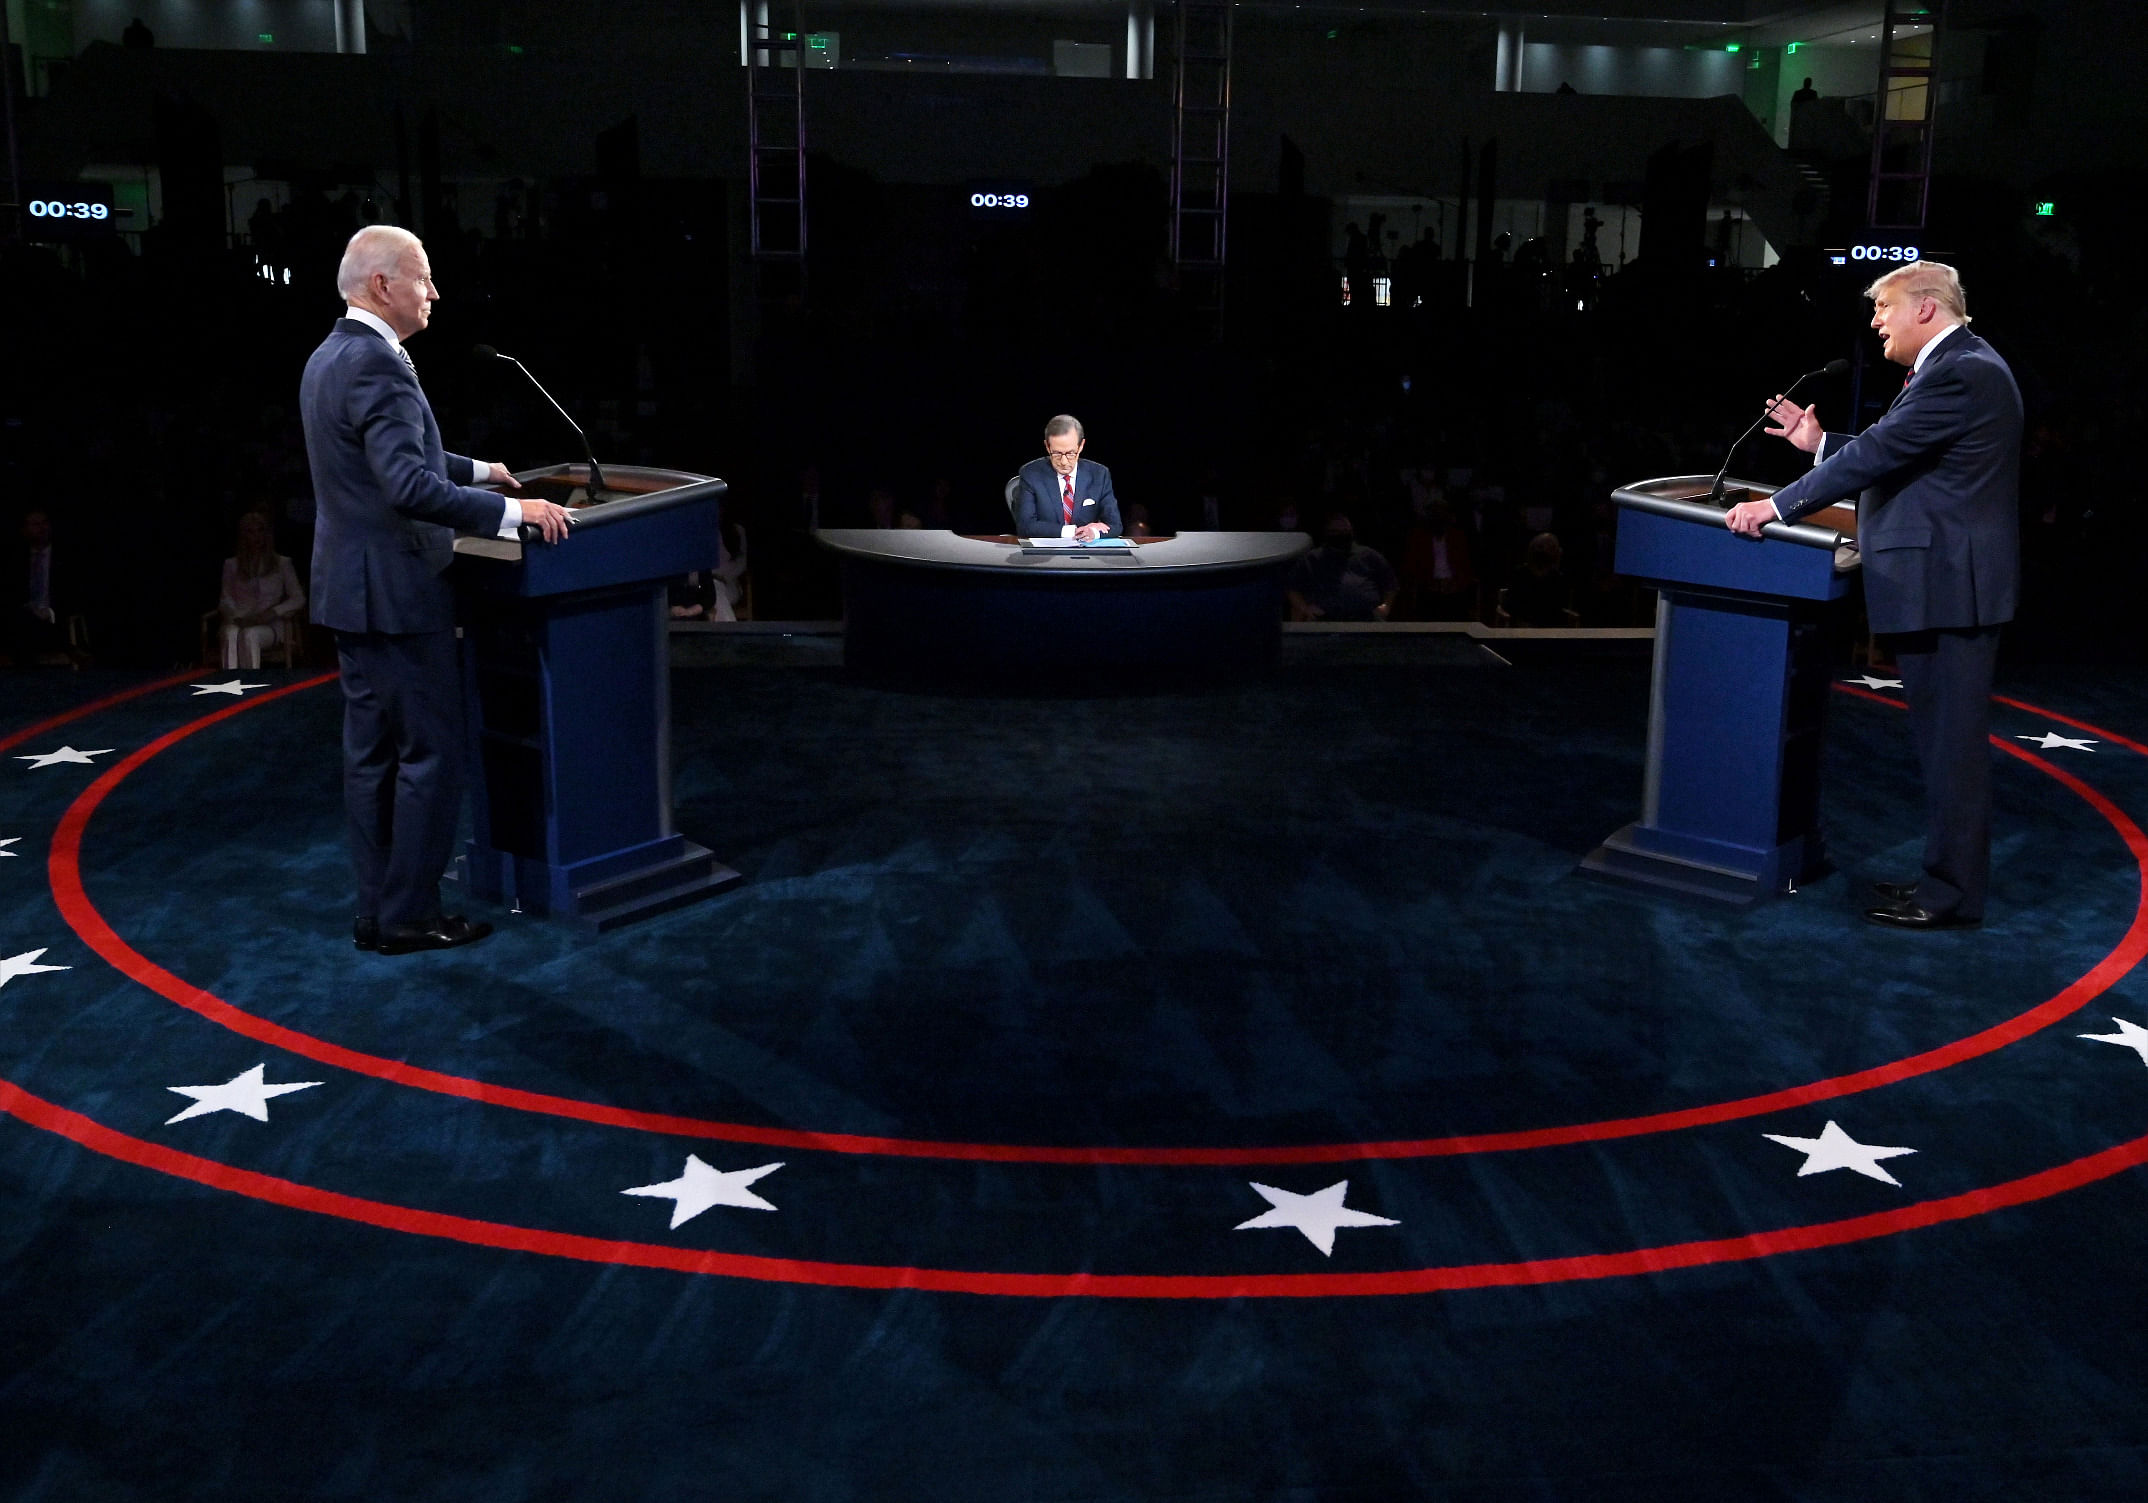 Highlights from the first US presidential debate 2020